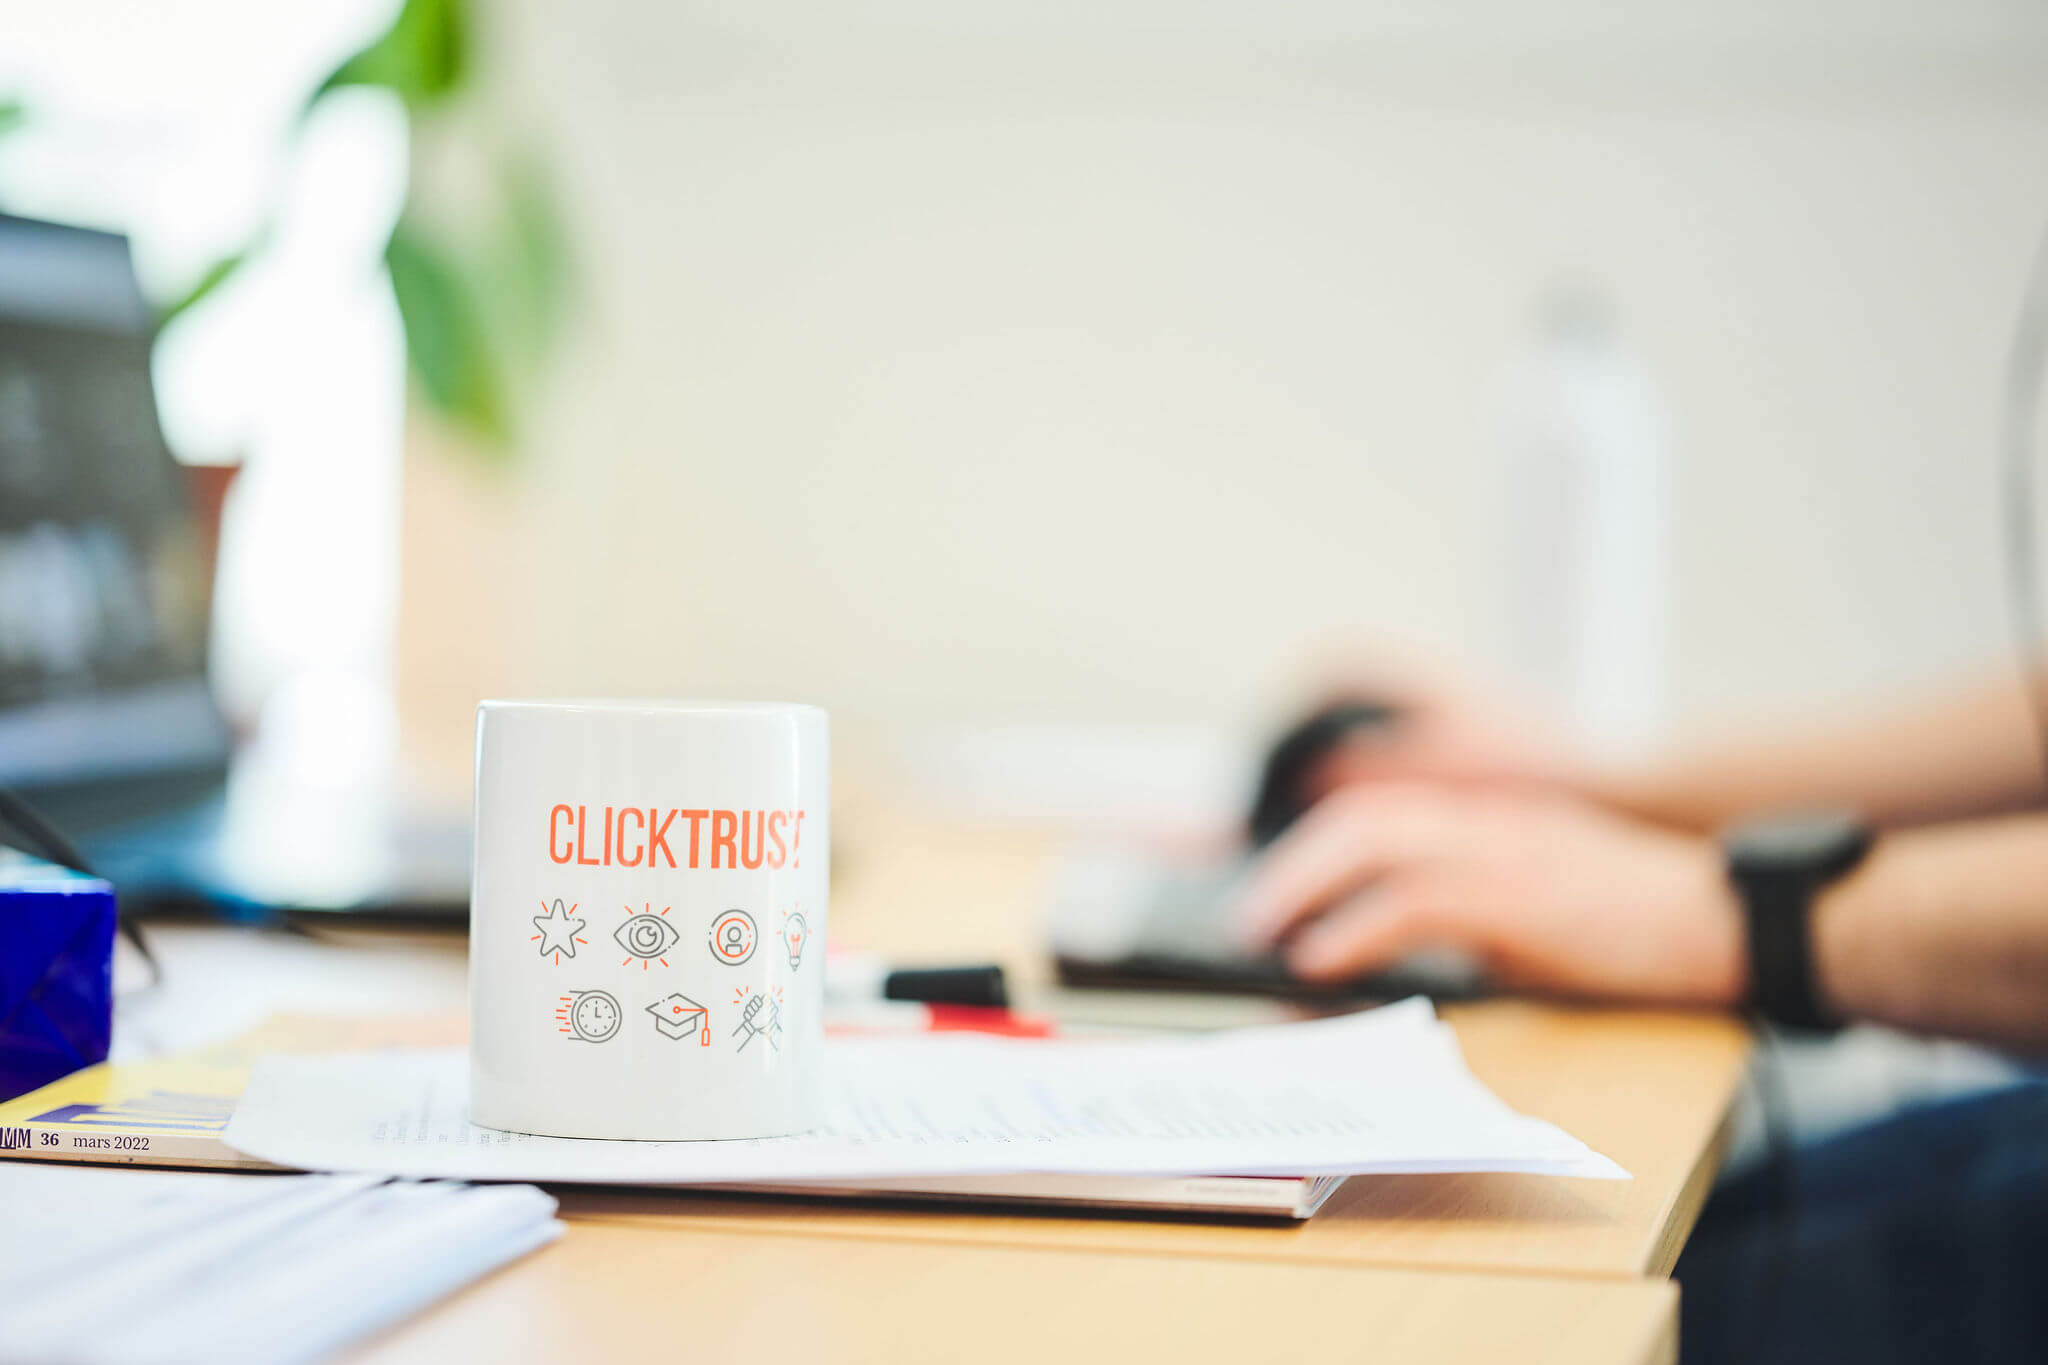 The CLICKTRUST monthly pick – July 2020